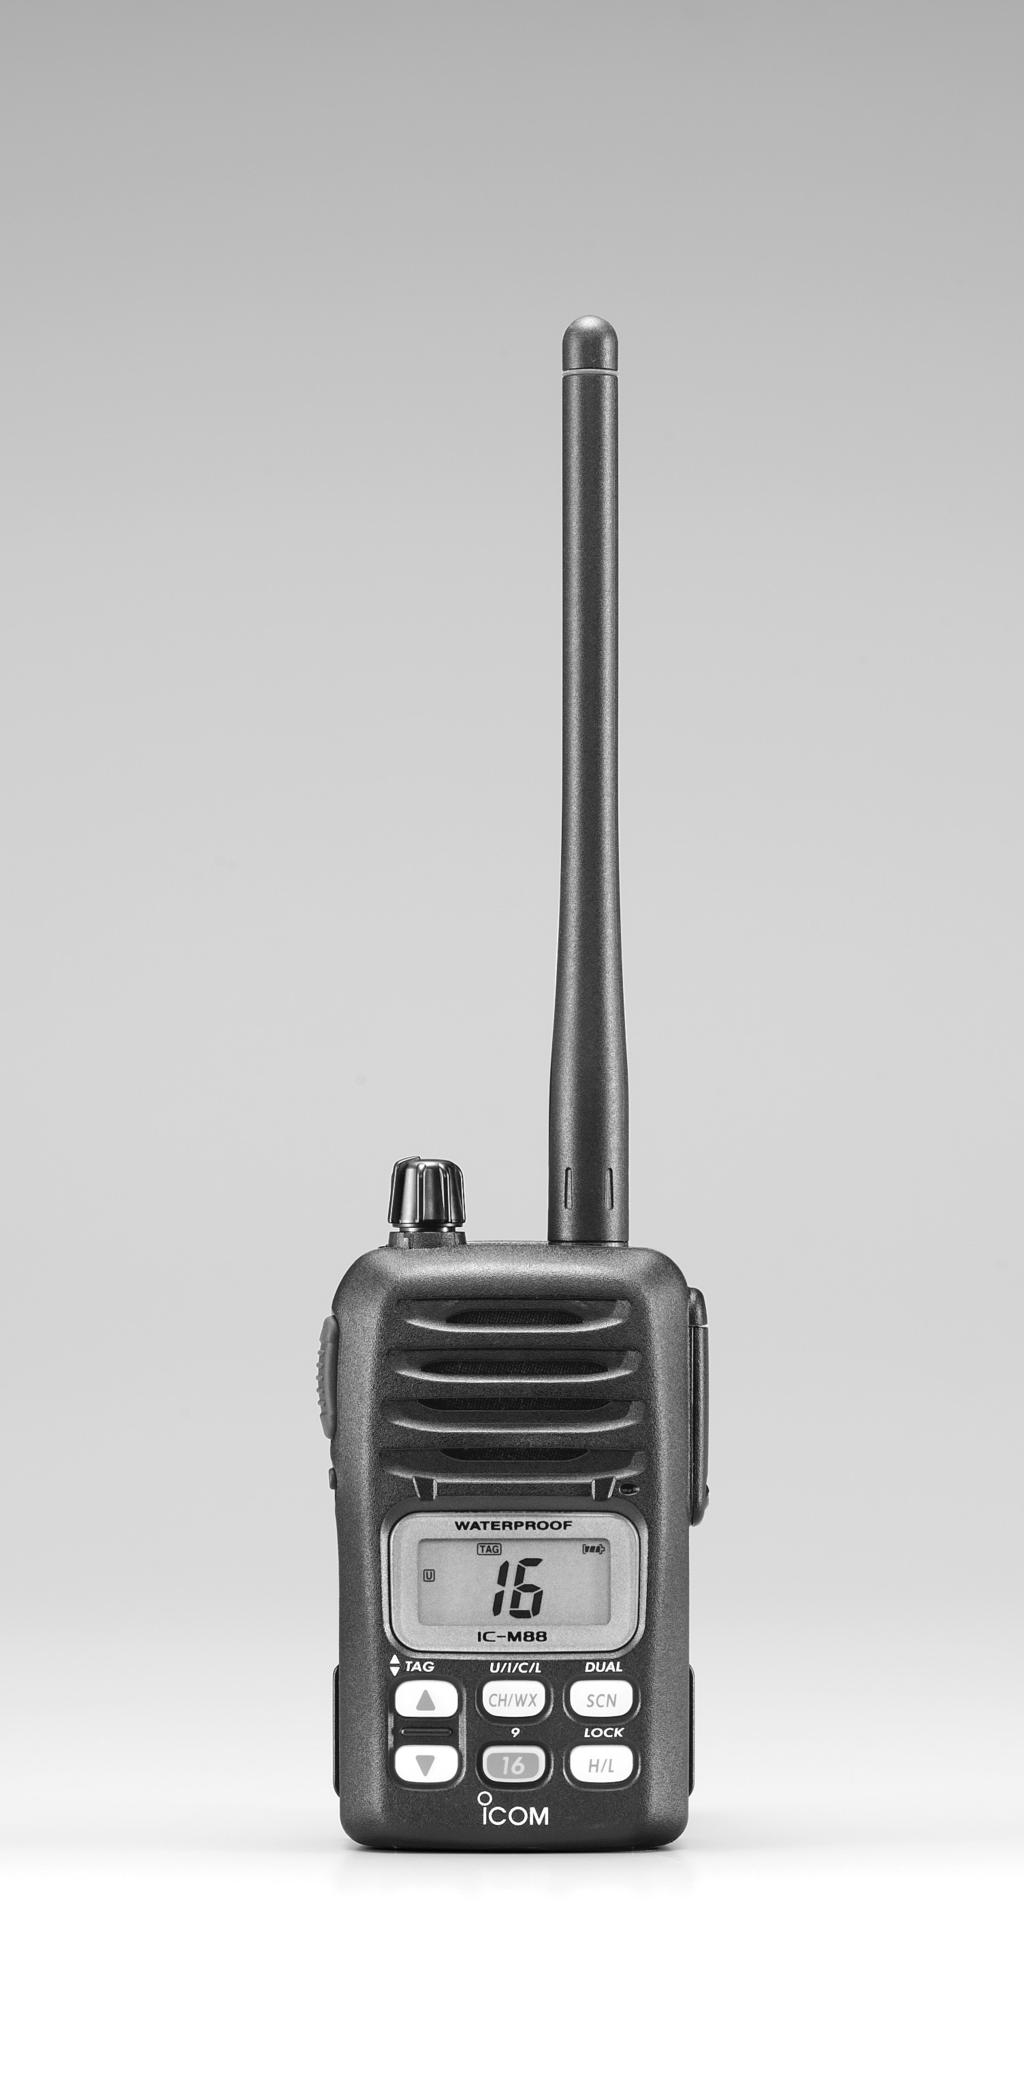 INSTRUCTION MANUAL VHF MARINE TRANSCEIVER im88 This device complies with Part 15 of the FCC